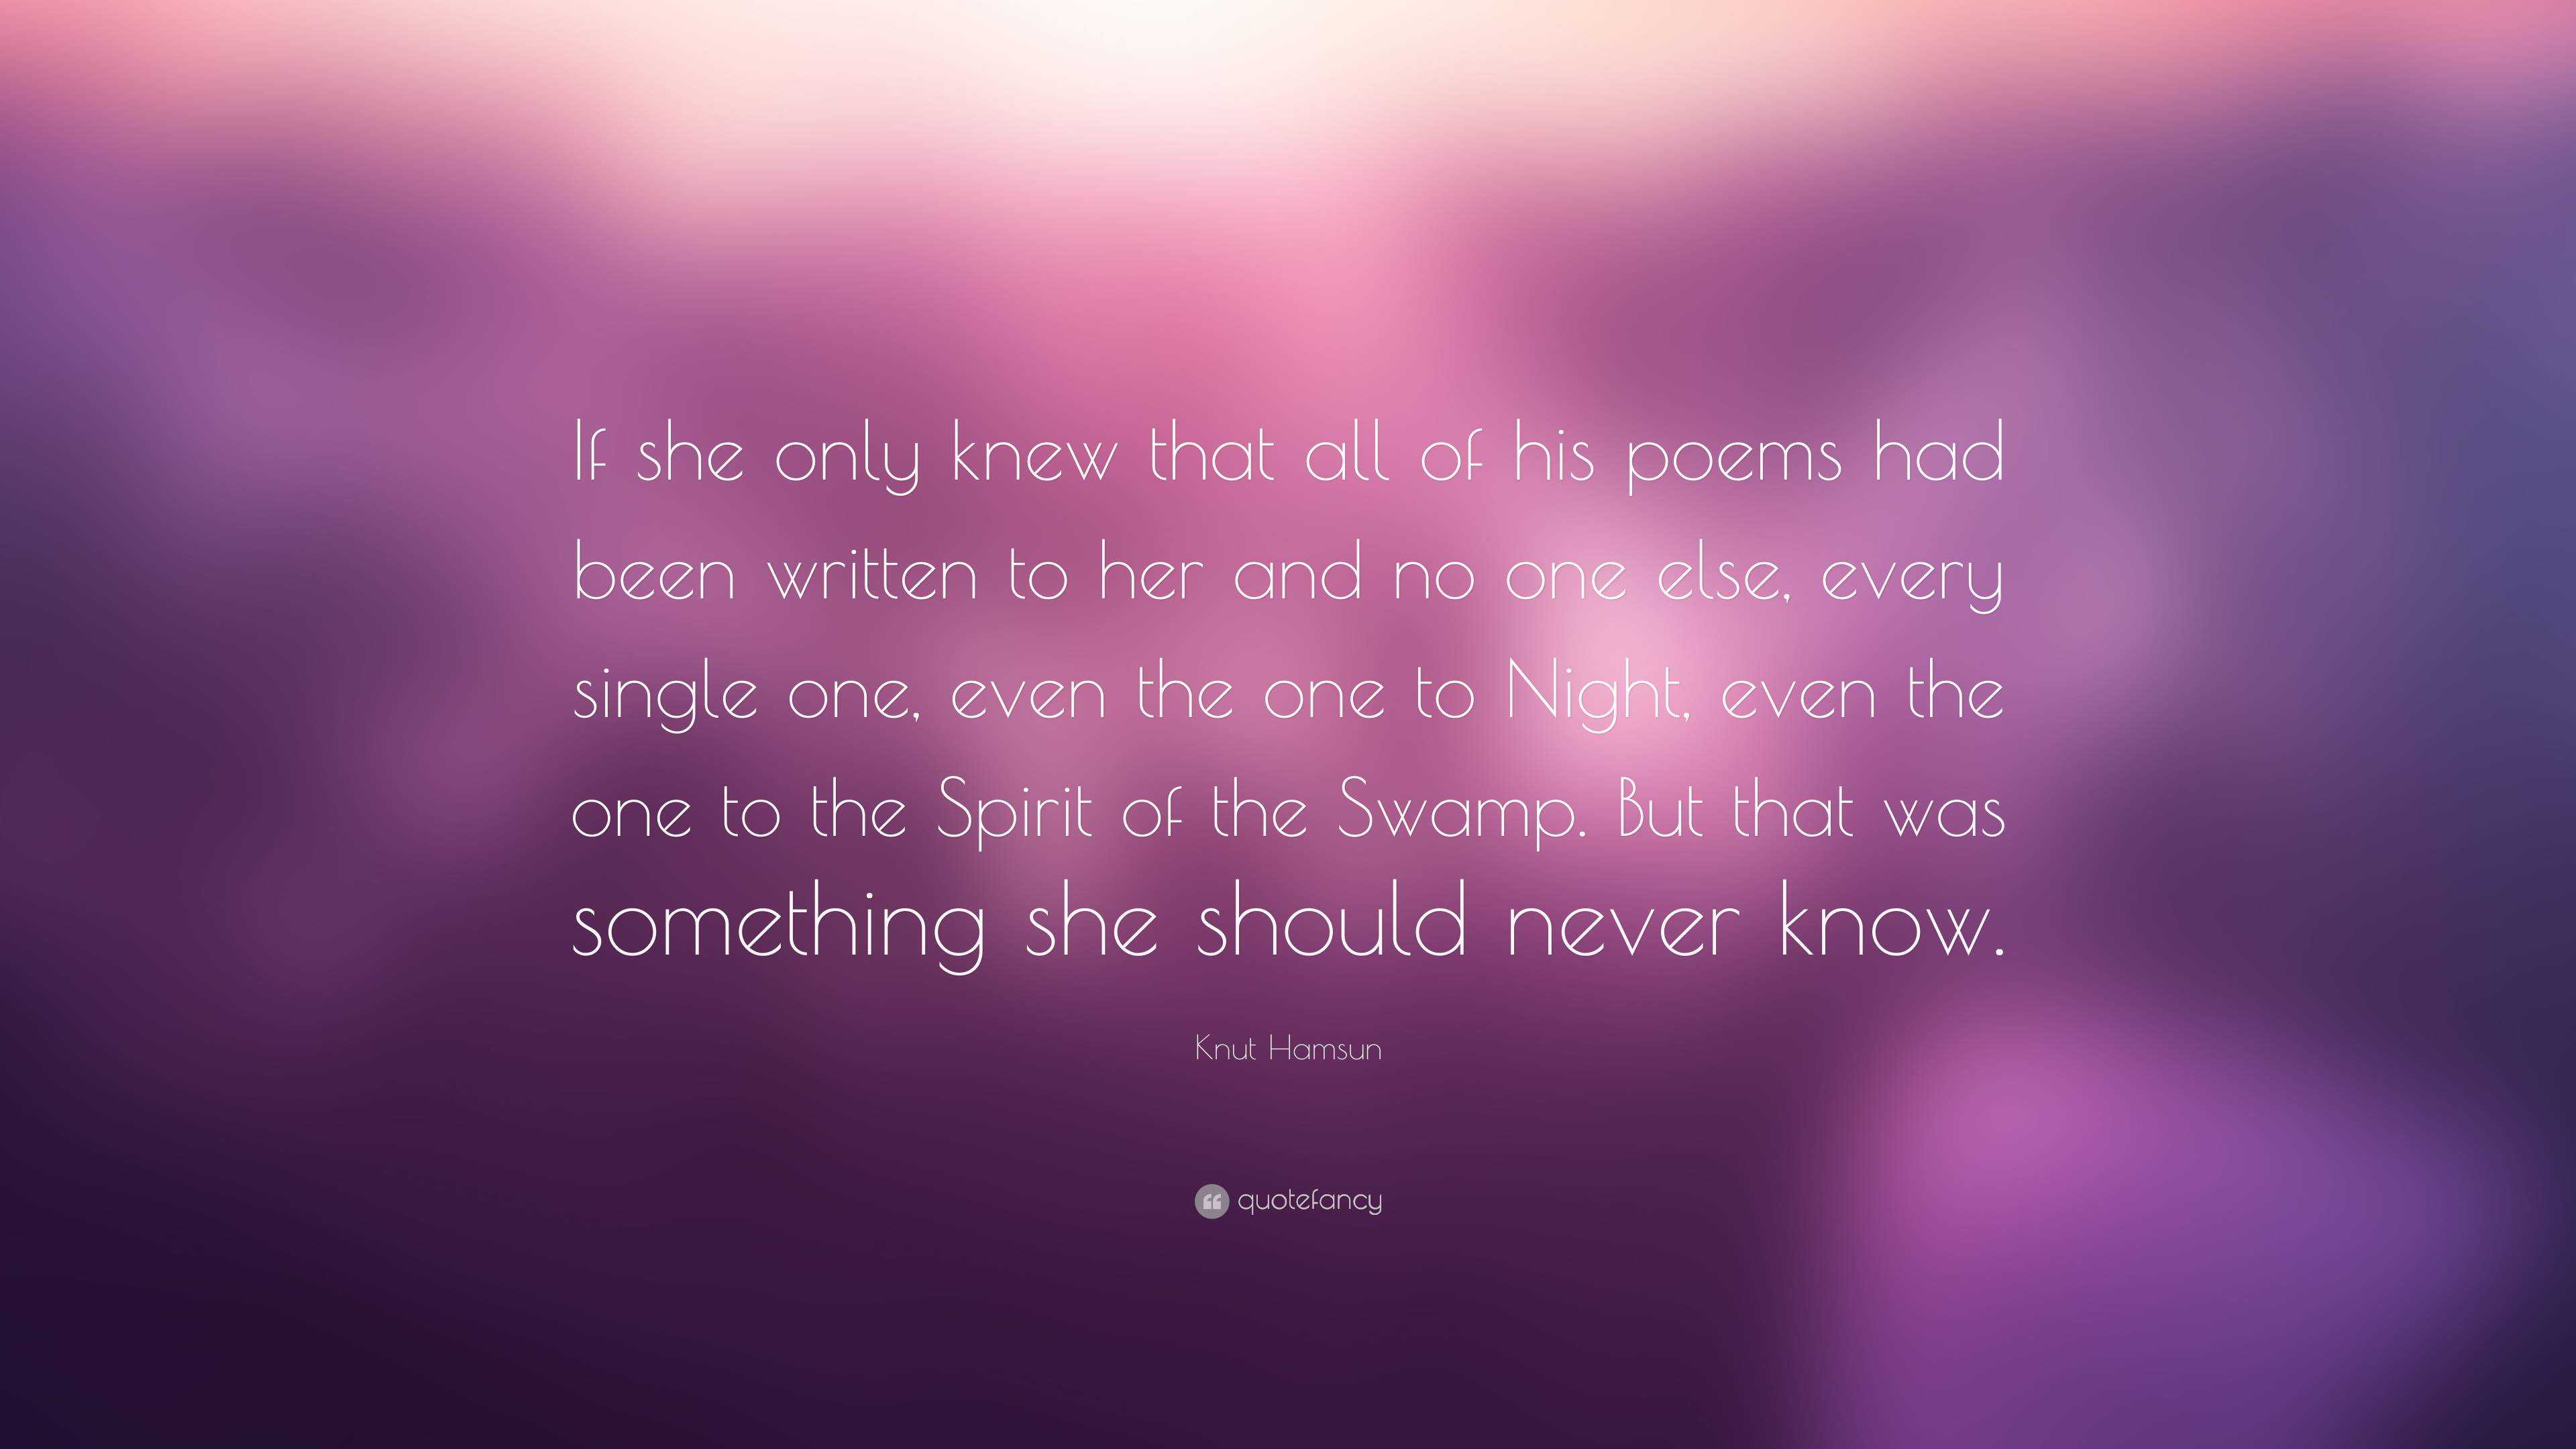 Knut Hamsun Quote: “If she only knew that all of his poems had been ...